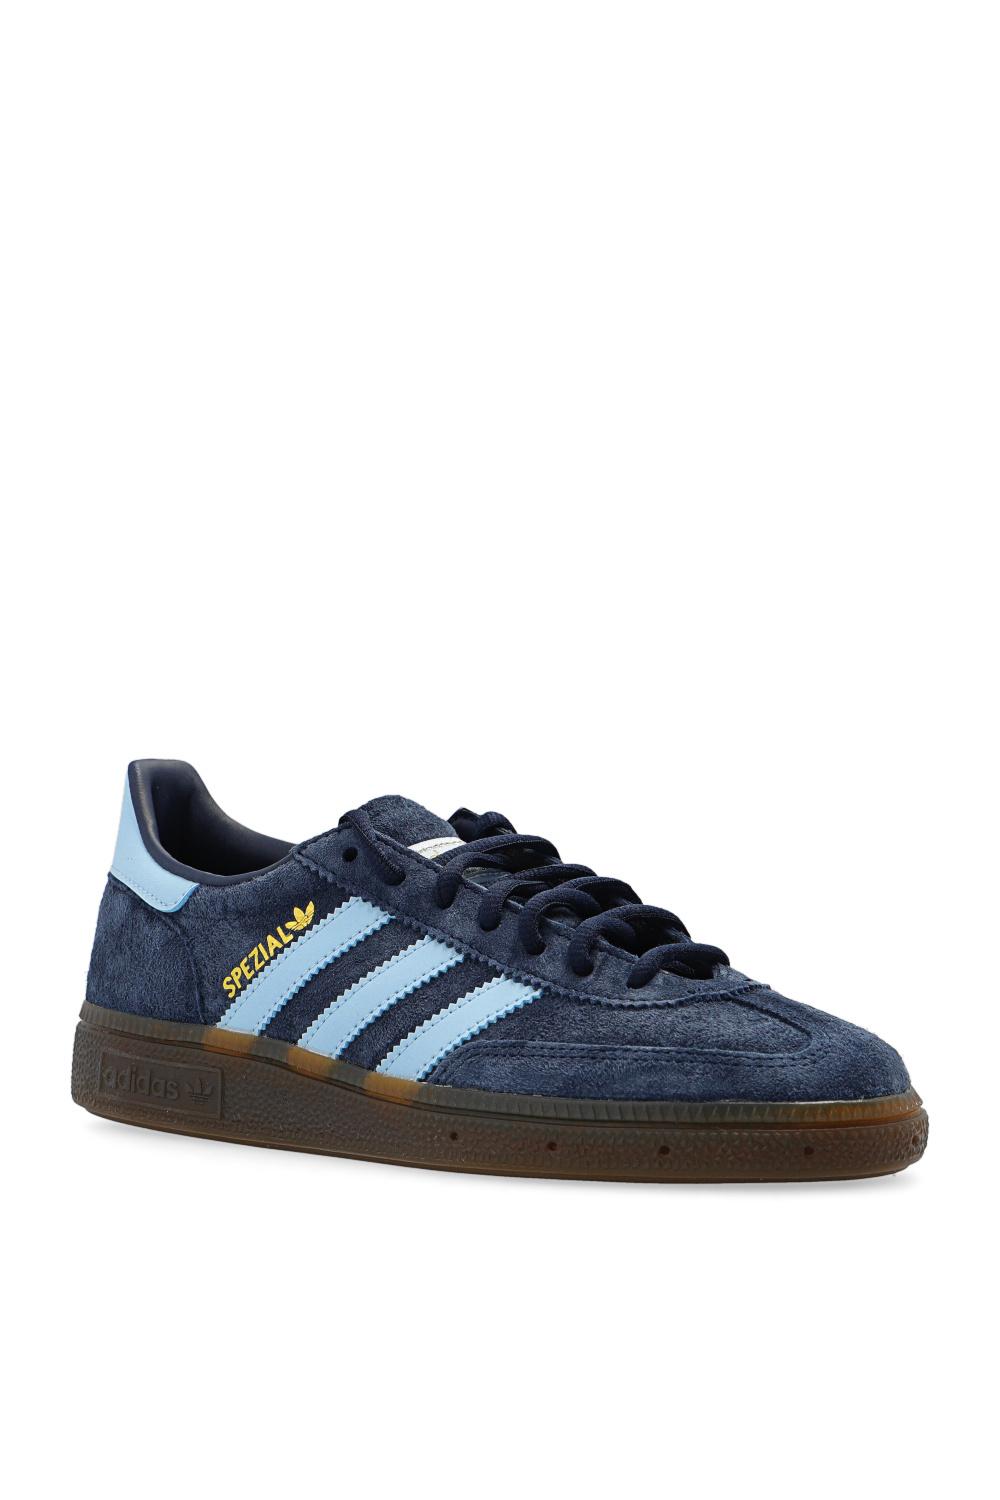 adidas Originals Leather 'handball Spezial' Sneakers in Navy Blue (Blue) |  Lyst